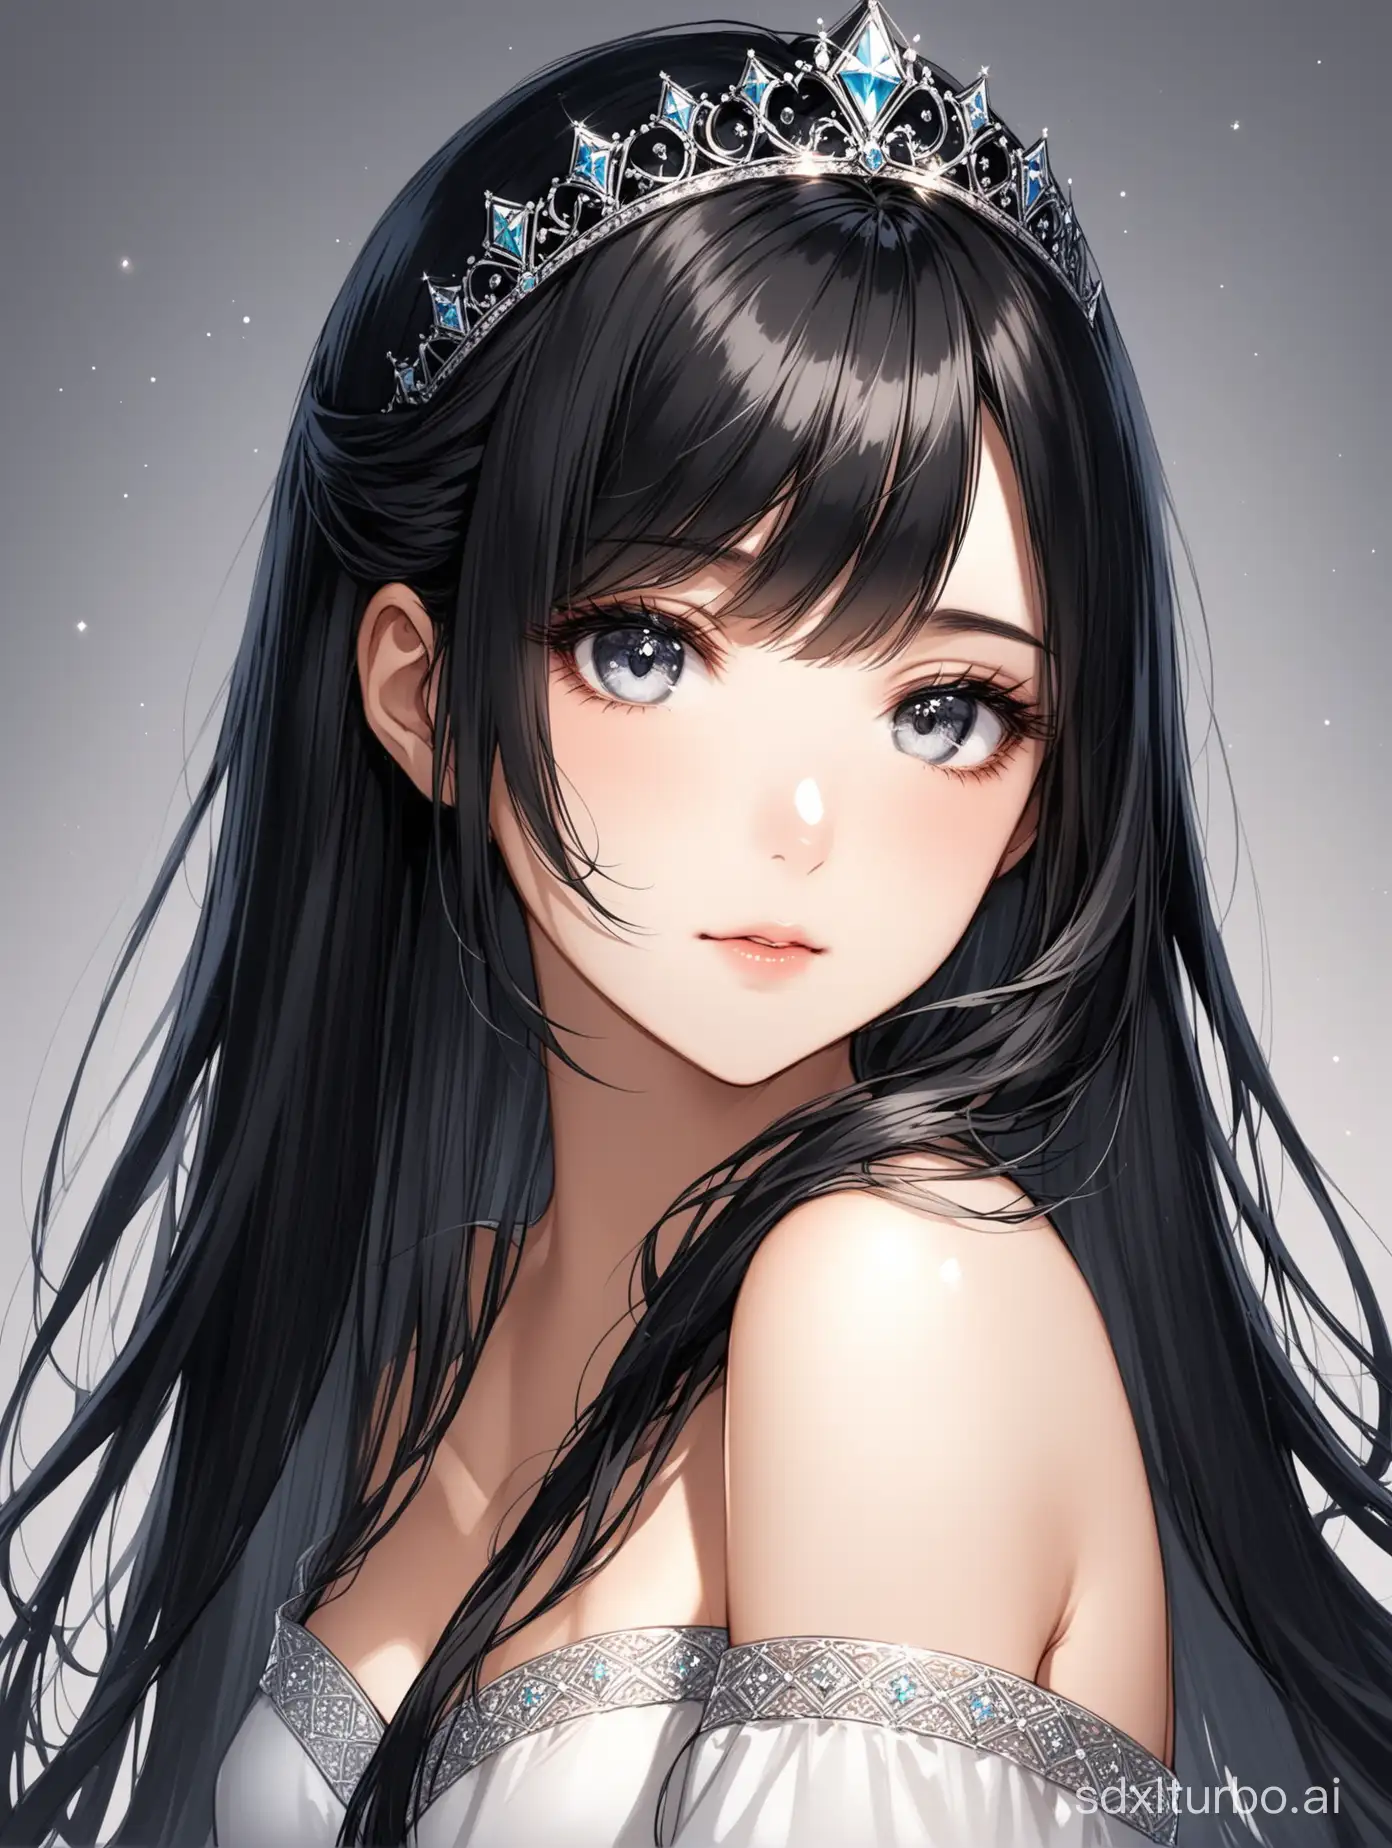 Exquisite-BlackHaired-Princess-with-Gray-Eyes